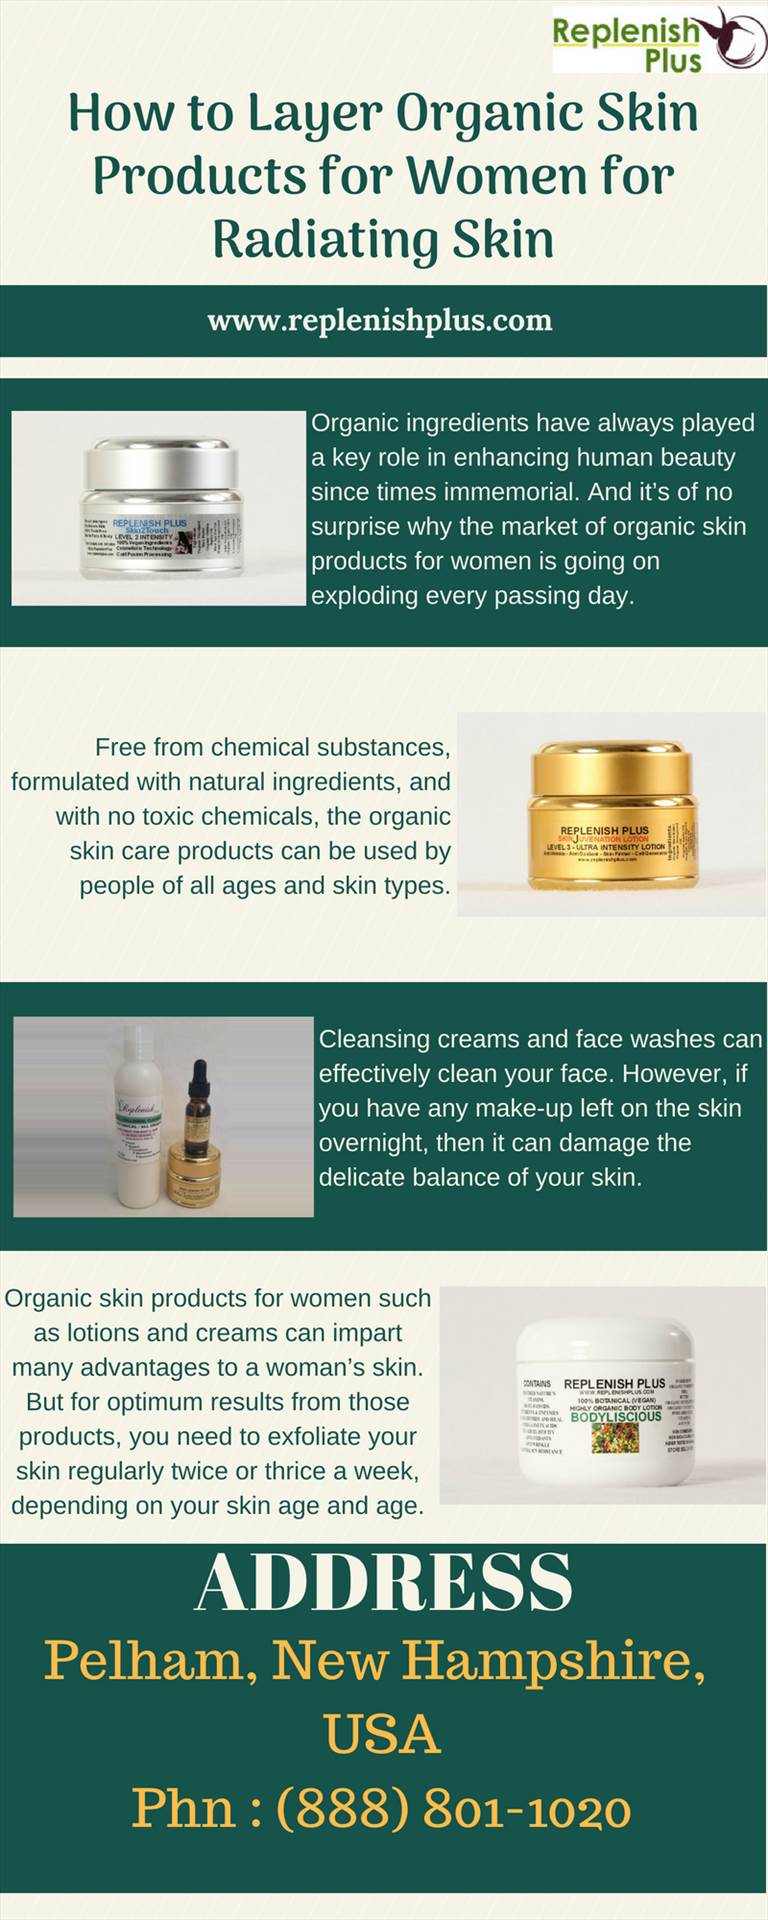 How to Layer Organic Skin Products for Women for Radiating Skin.jpg  by Replenish plus